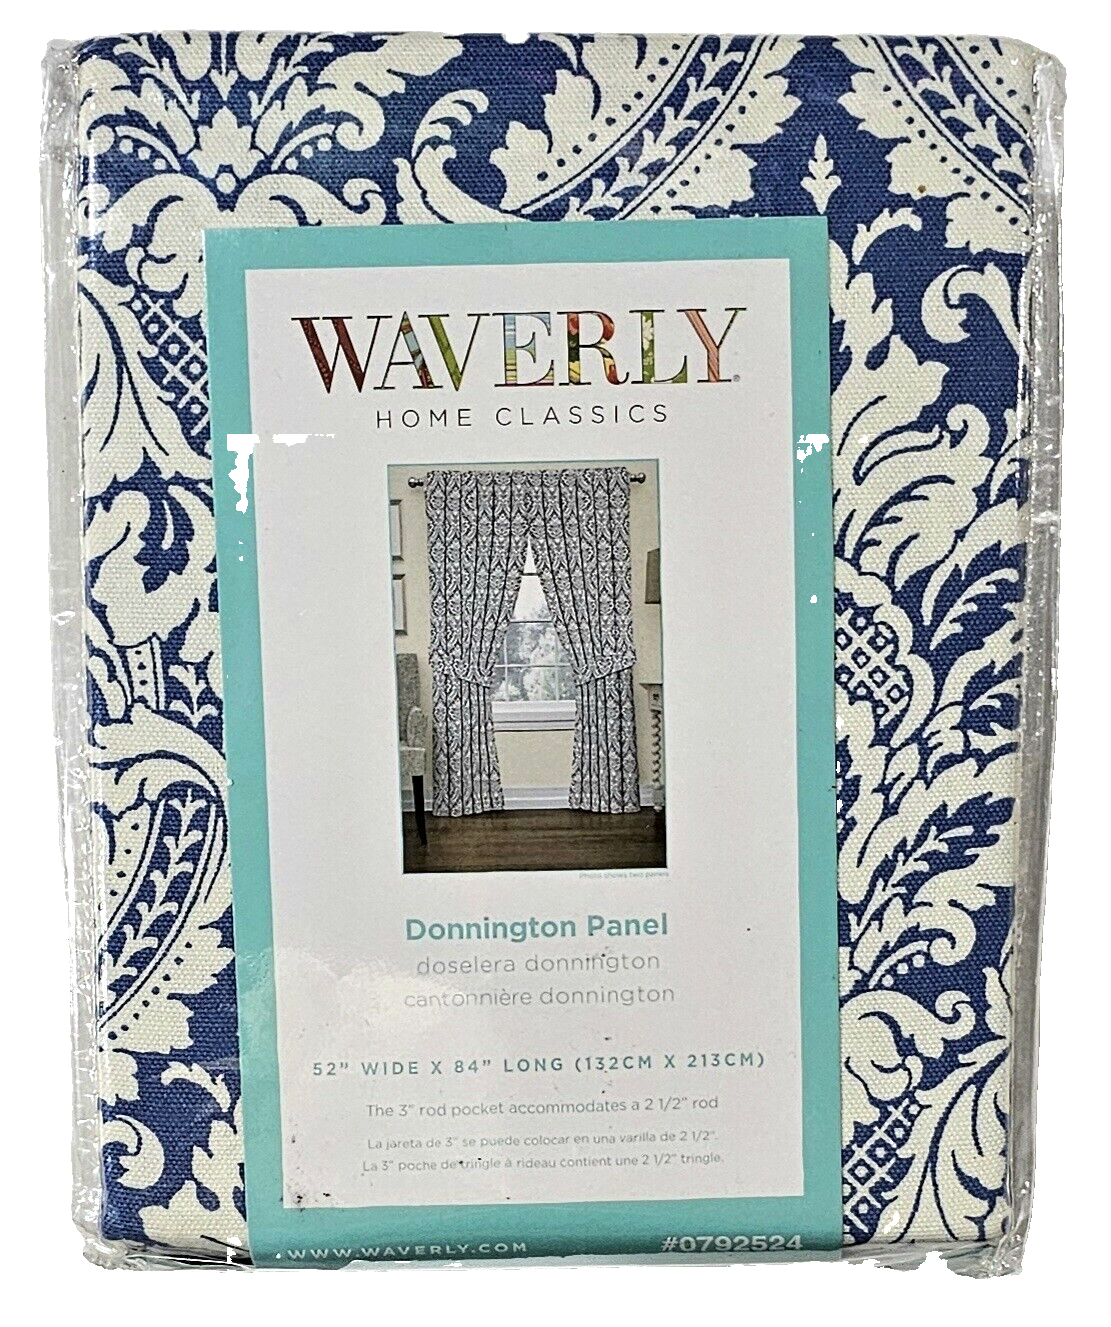 Waverly Home Classics Donnington Panel 52x84in Long Fits 2½ In Rod 0792524 Blue - $30.99